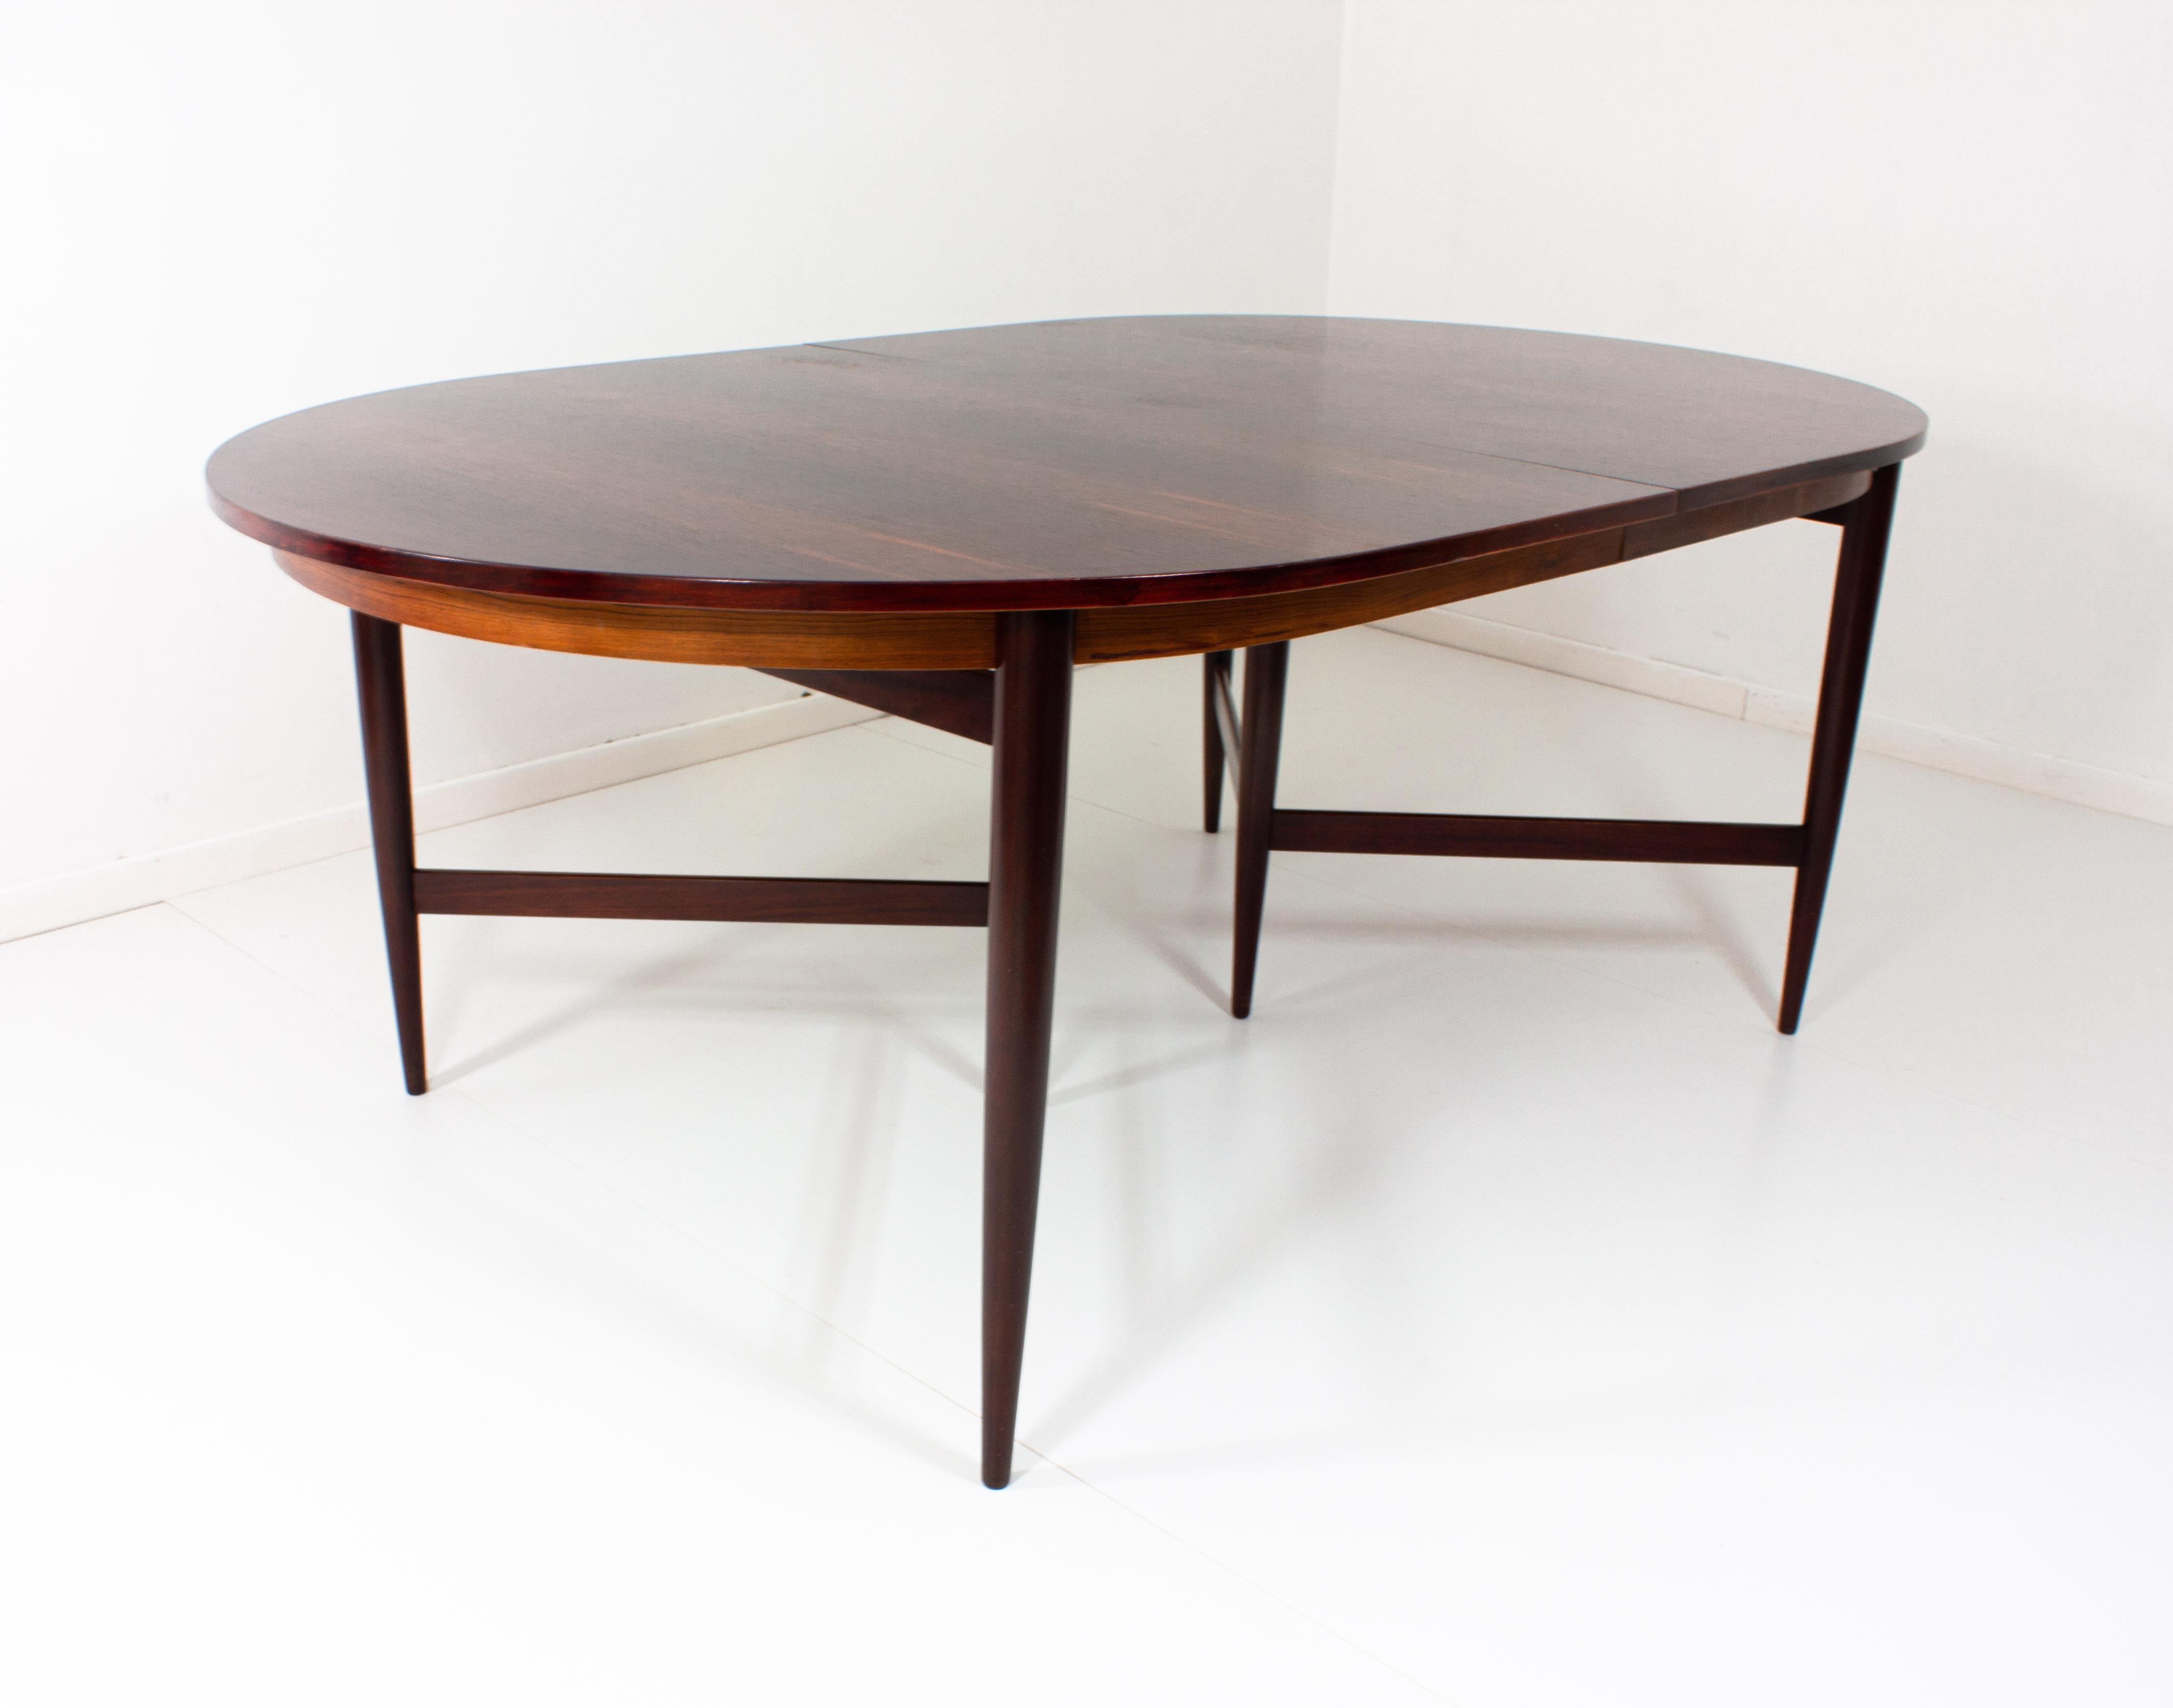 Wonderful oval dining table in rosewood with tripod legs. Apart from the organic shape of the tabletop, the tripod legs make for a very refined and distinguished look.